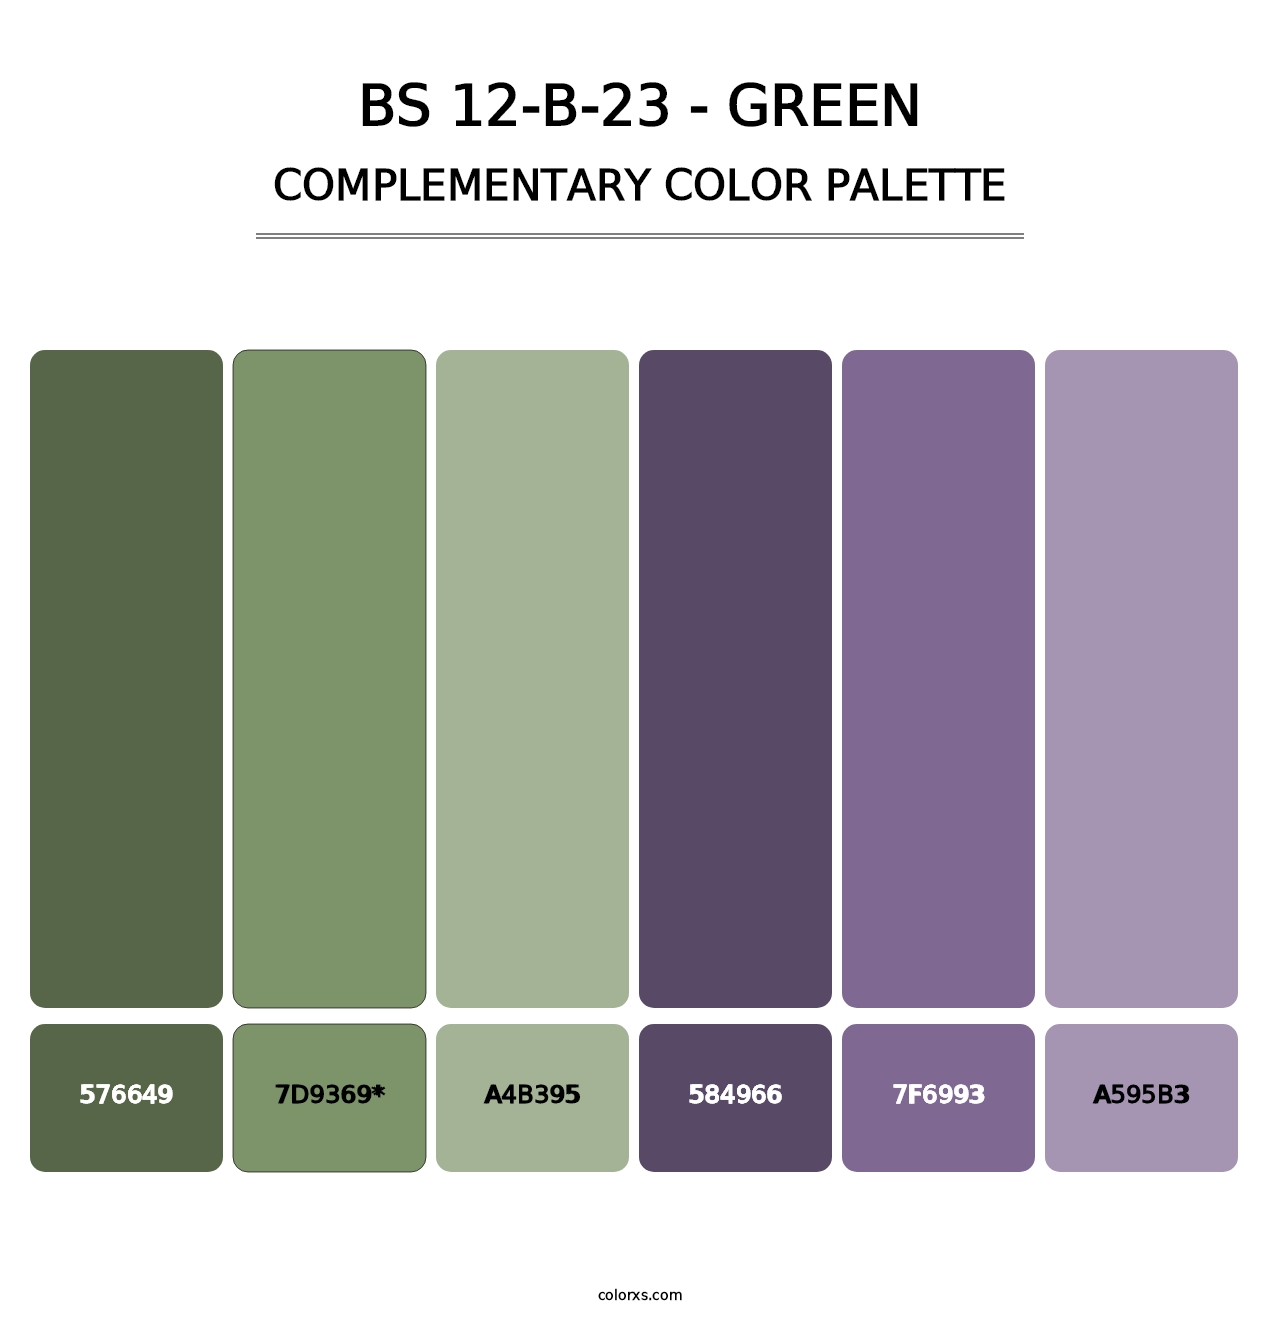 BS 12-B-23 - Green - Complementary Color Palette